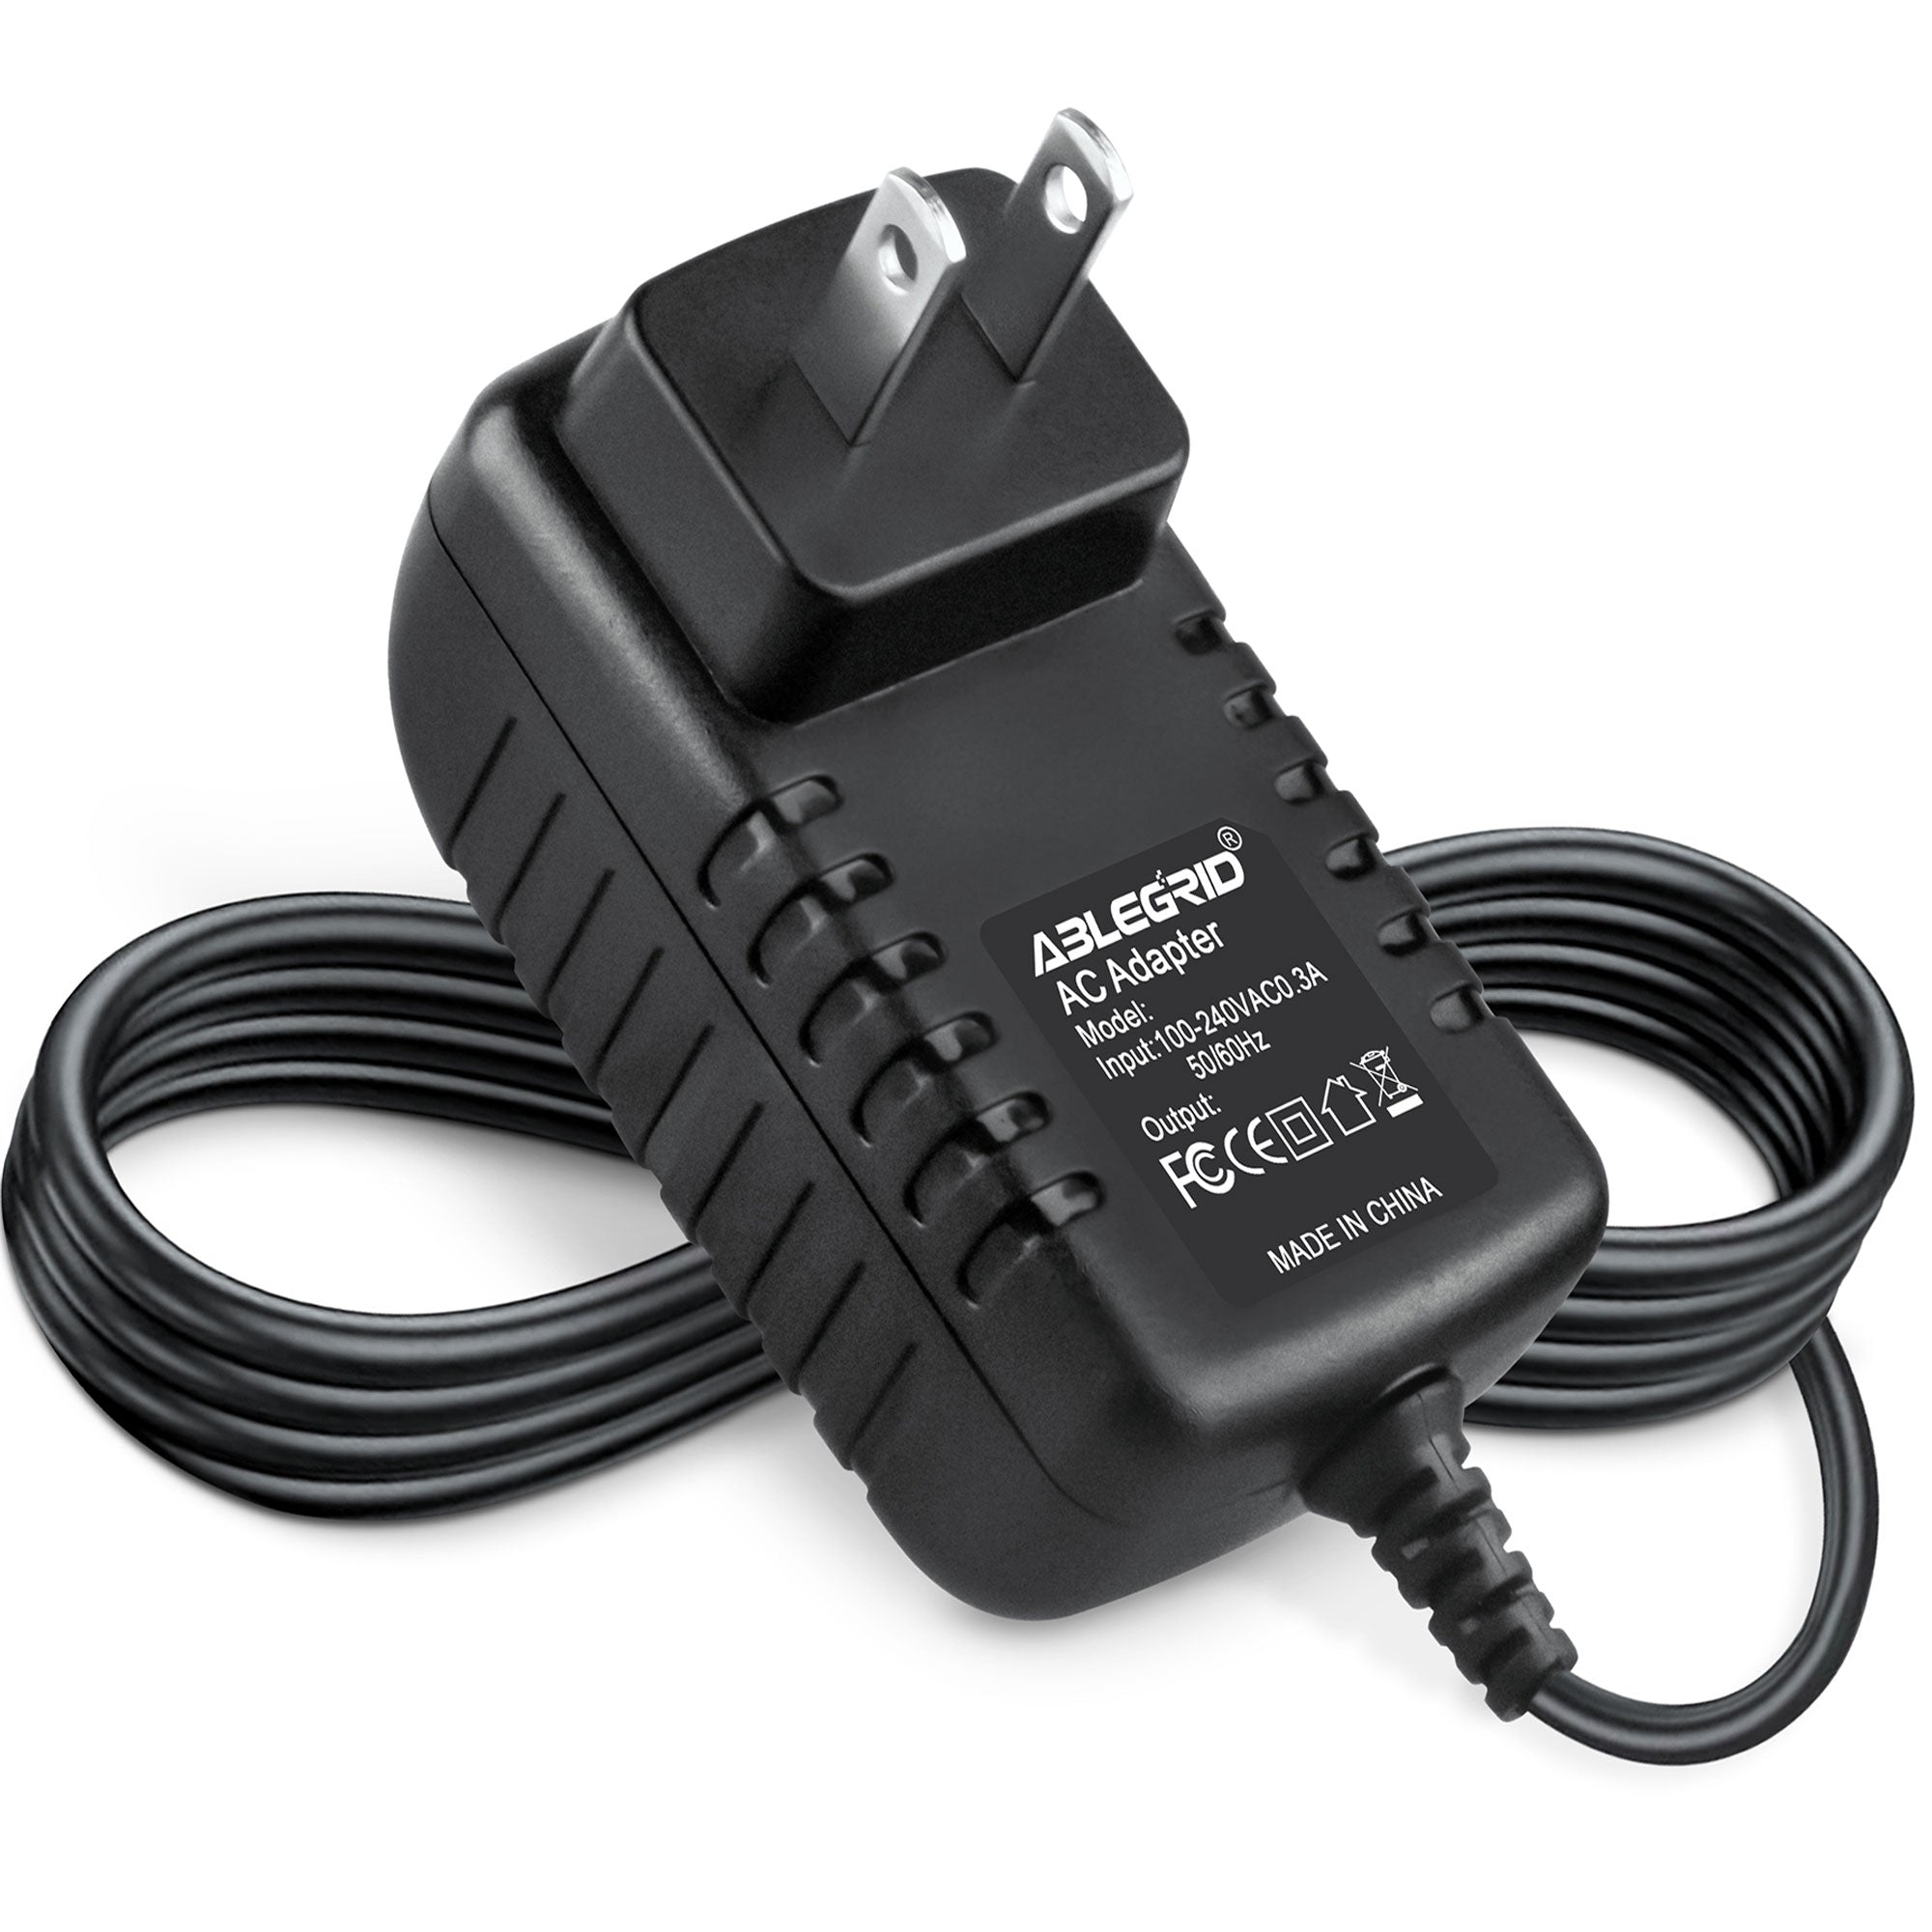 AbleGrid AC-DC Adapter for Model: SAW-120500 SAW120500 ITE Power Supply Cord Cable PS Wall Home Charger Input: 100 - 240 VAC Worldwide Use Mains PSU